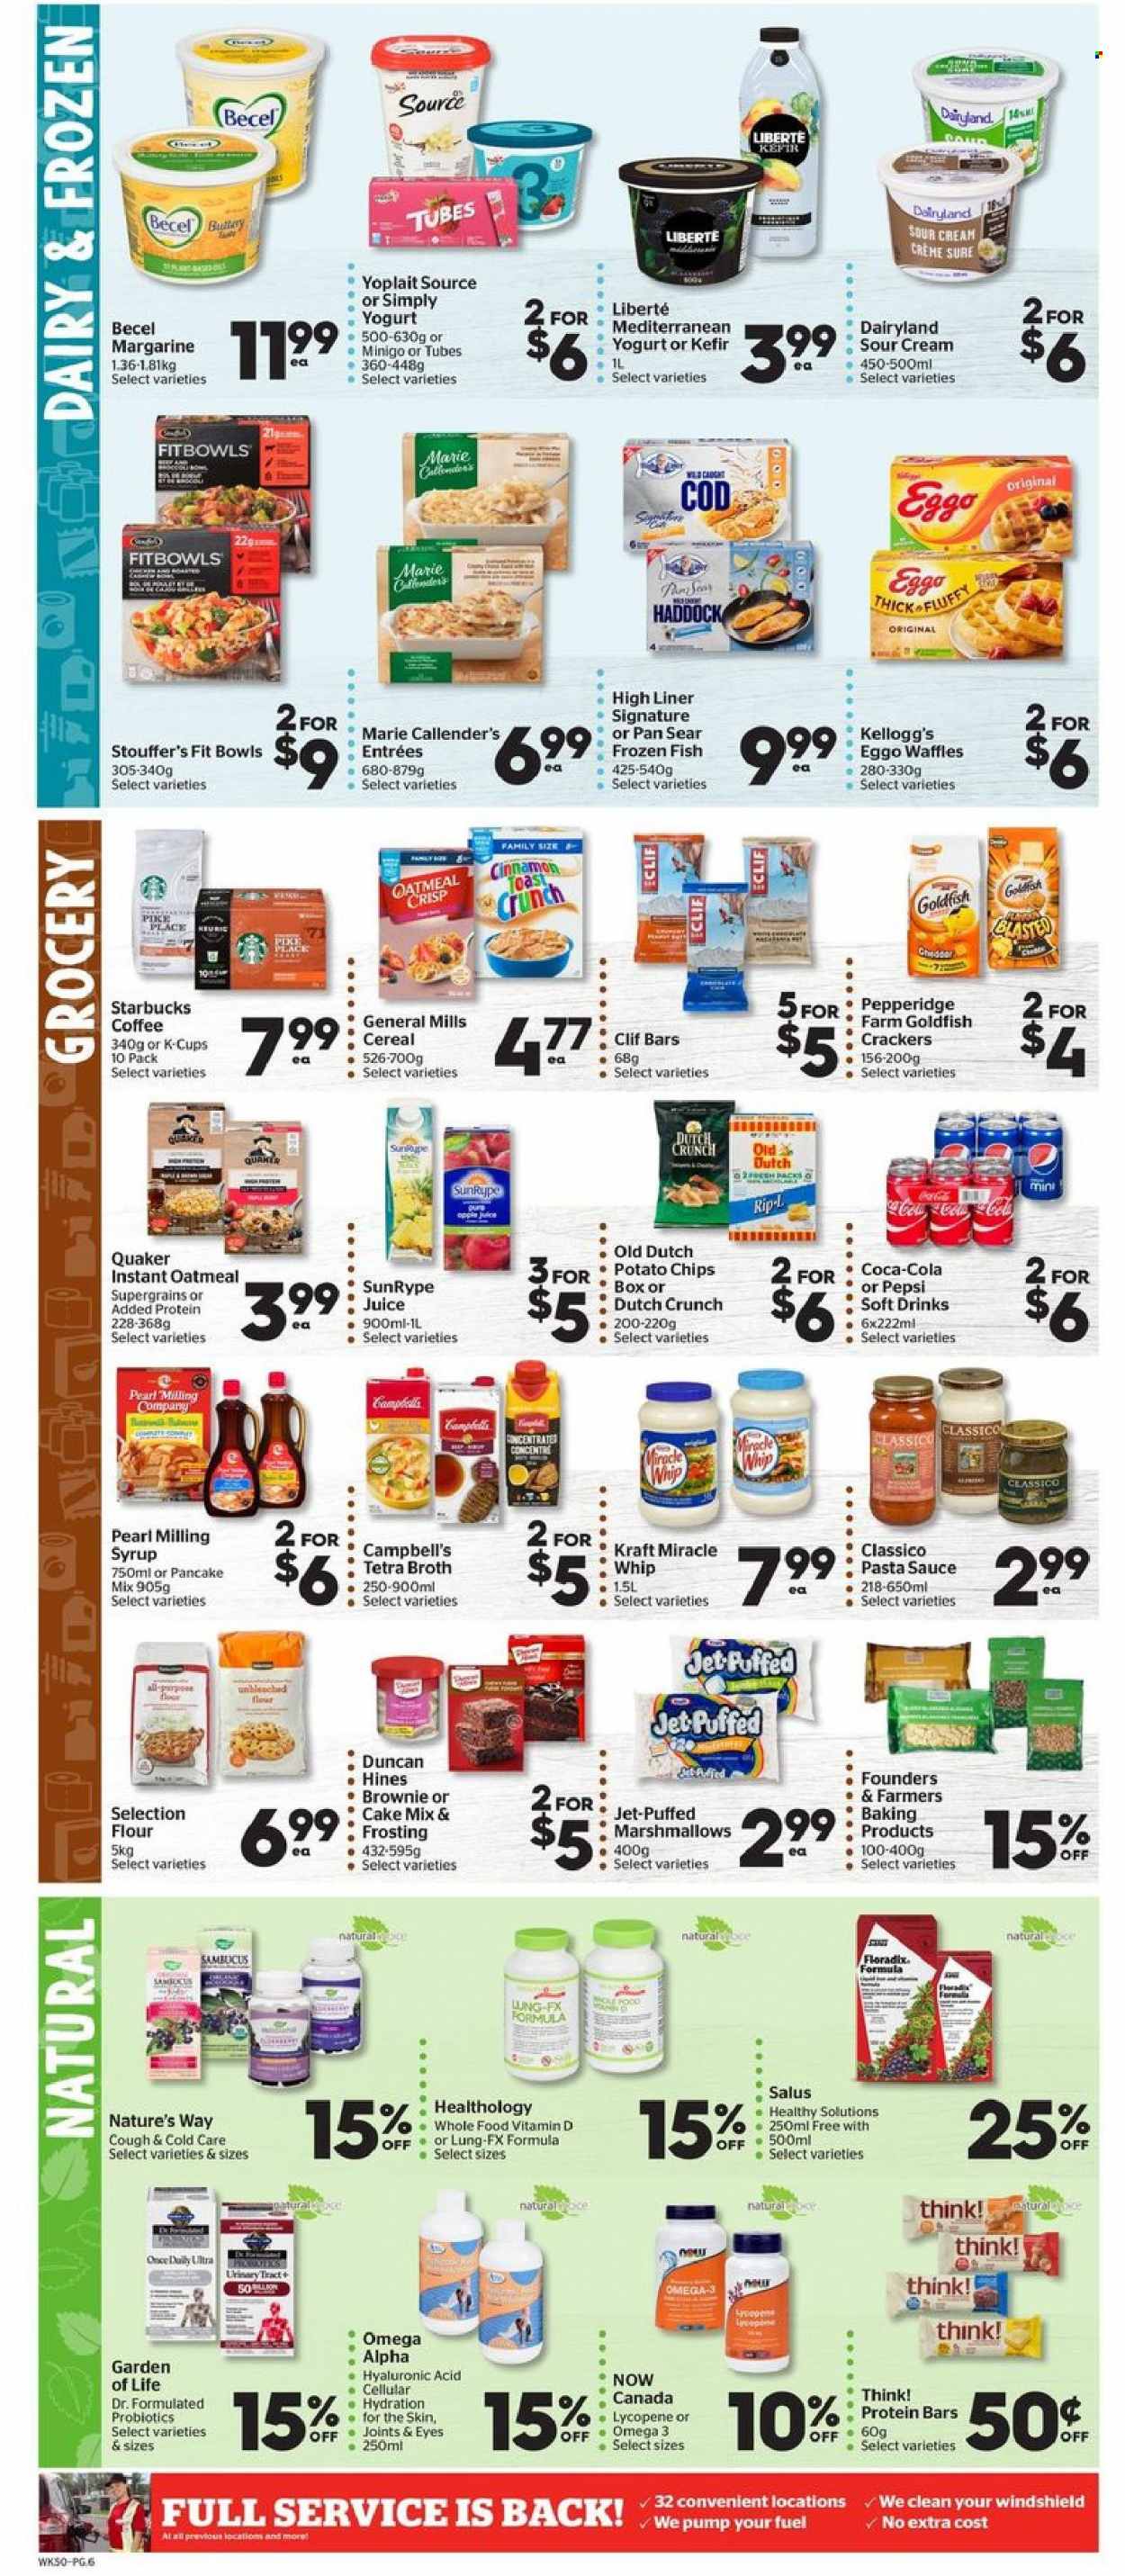 thumbnail - Calgary Co-op Flyer - October 14, 2021 - October 20, 2021 - Sales products - brownies, waffles, cake mix, cod, haddock, fish, Campbell's, pasta sauce, sauce, pancakes, Quaker, Marie Callender's, Kraft®, yoghurt, Yoplait, kefir, margarine, sour cream, Miracle Whip, Stouffer's, marshmallows, crackers, Kellogg's, potato chips, Goldfish, flour, frosting, oatmeal, broth, cereals, protein bar, cinnamon, Classico, syrup, Coca-Cola, Pepsi, juice, soft drink, coffee, coffee capsules, Starbucks, K-Cups, Jet, Sure, Omega-3. Page 7.